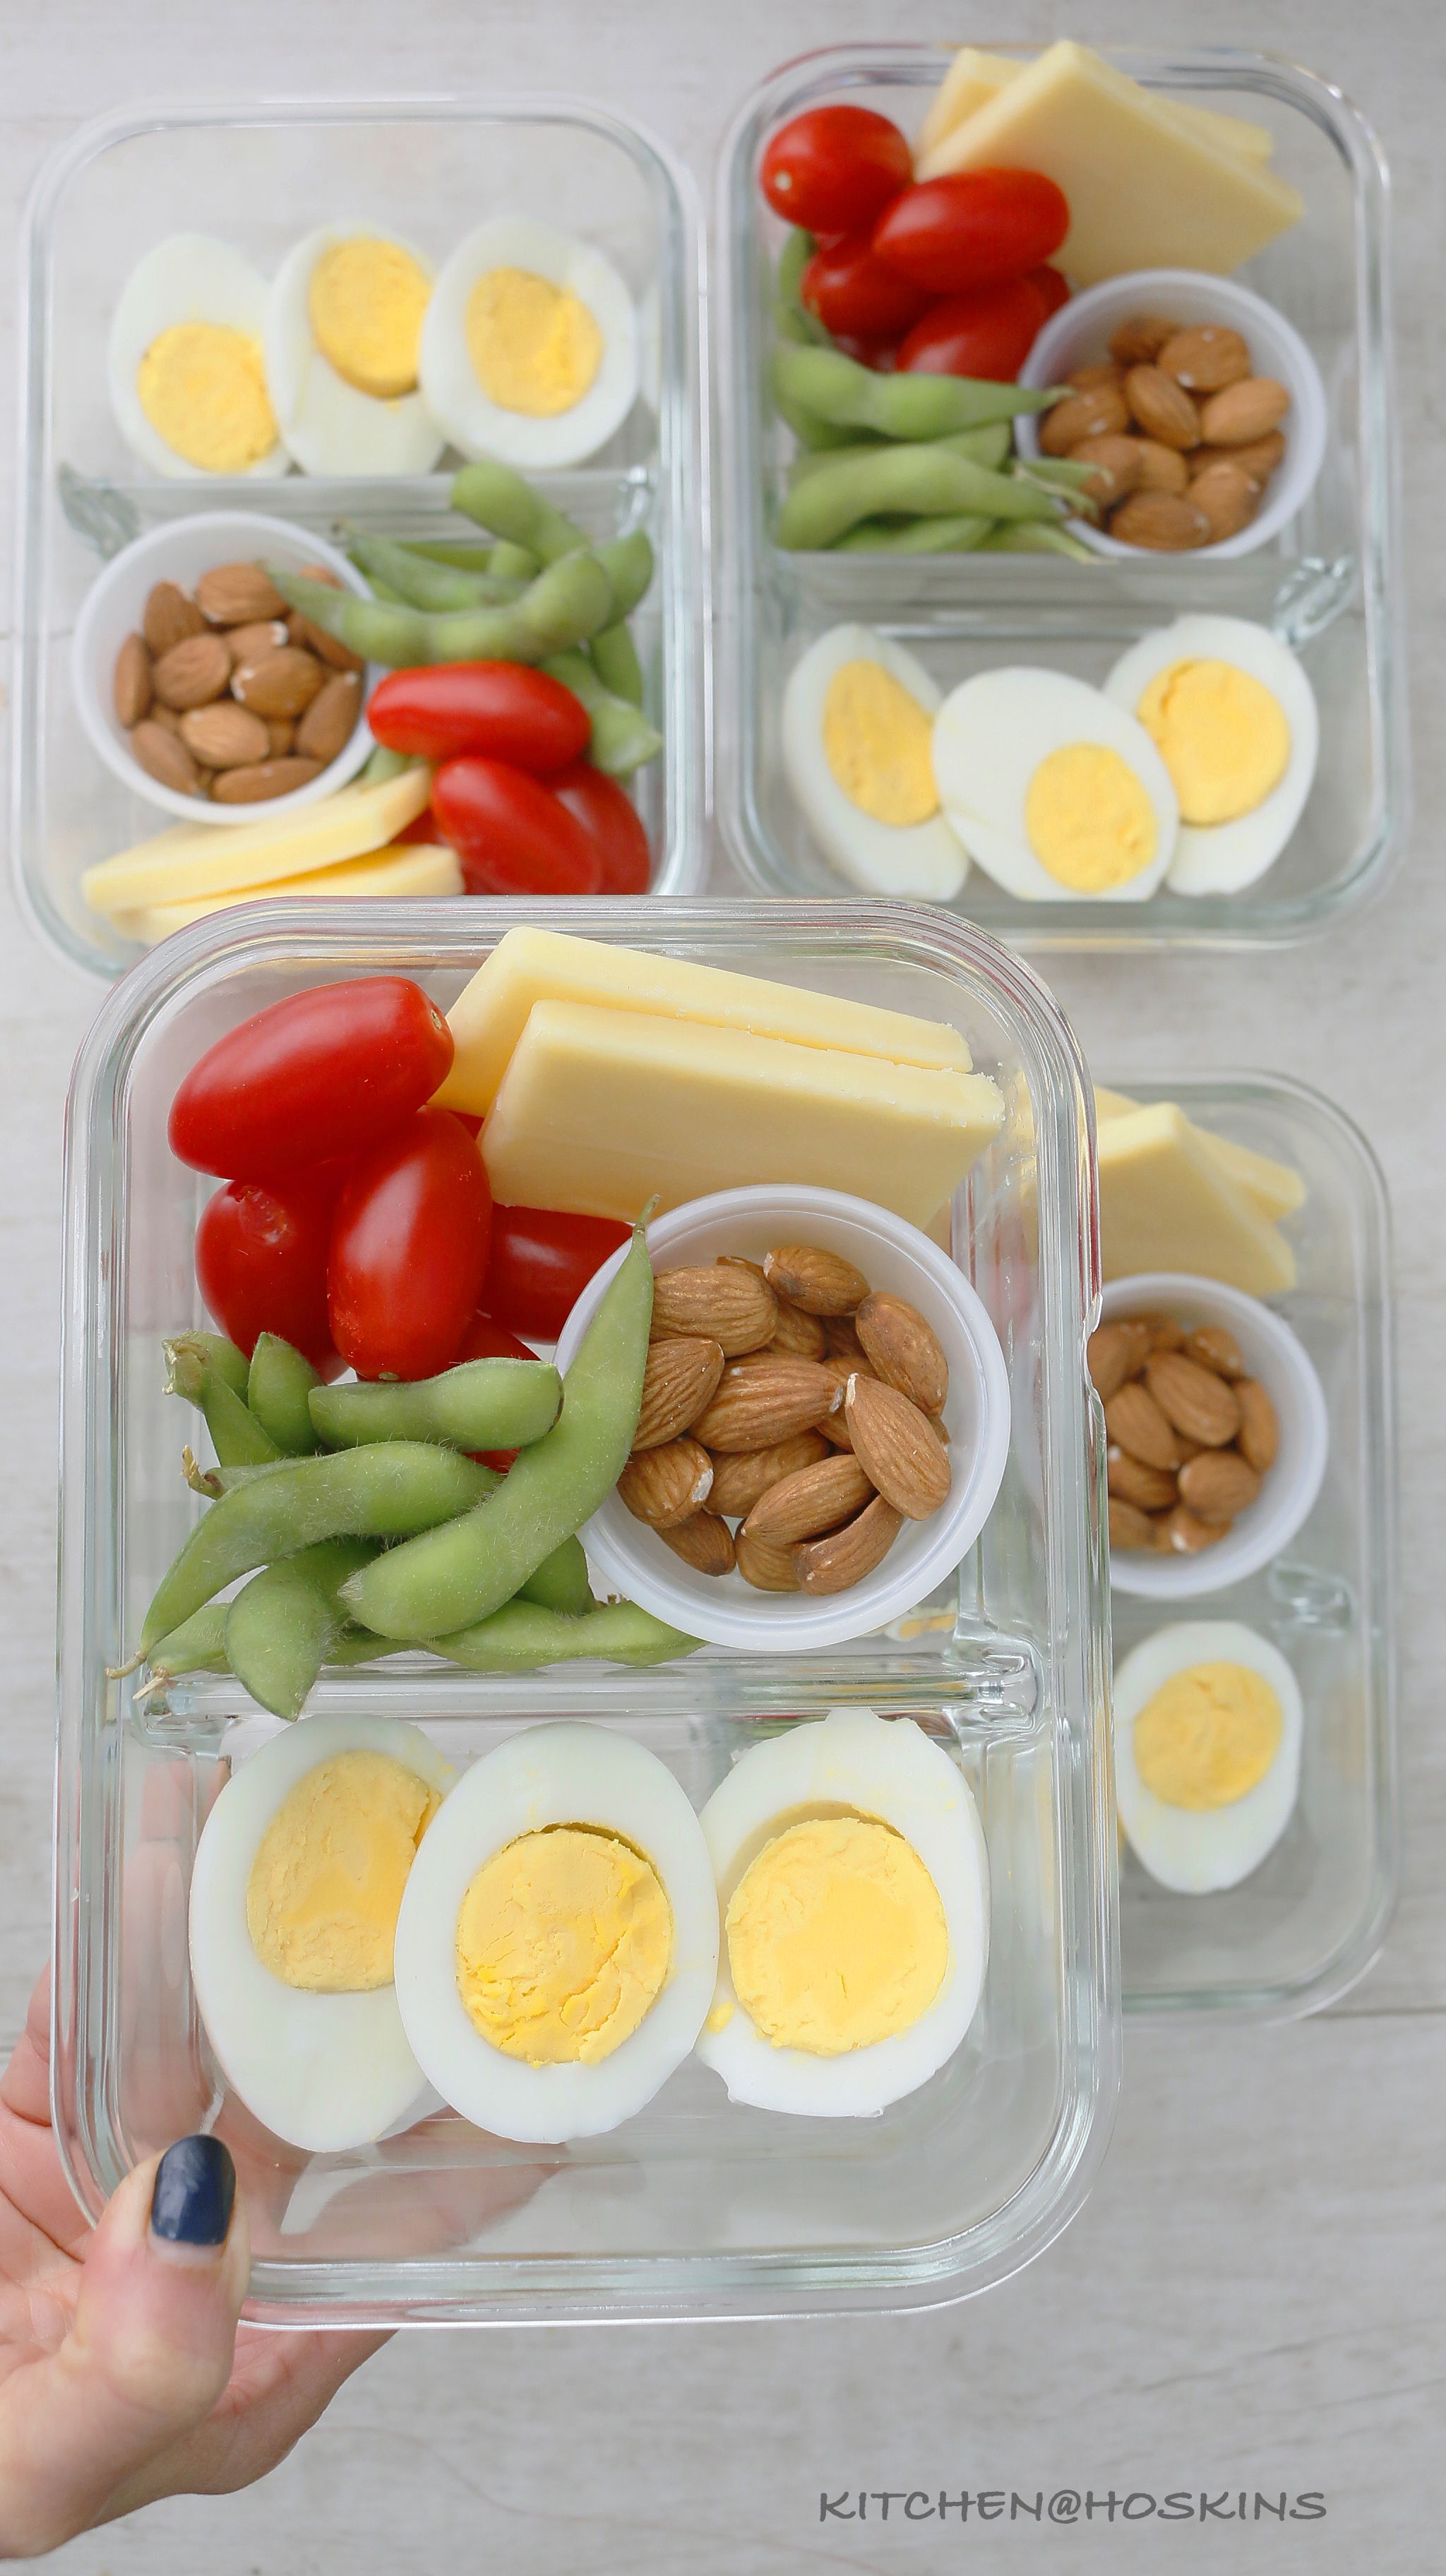 DIY Protein Snack Box Meal Prep | Kitchen @ Hoskins -   fitness Meals protein